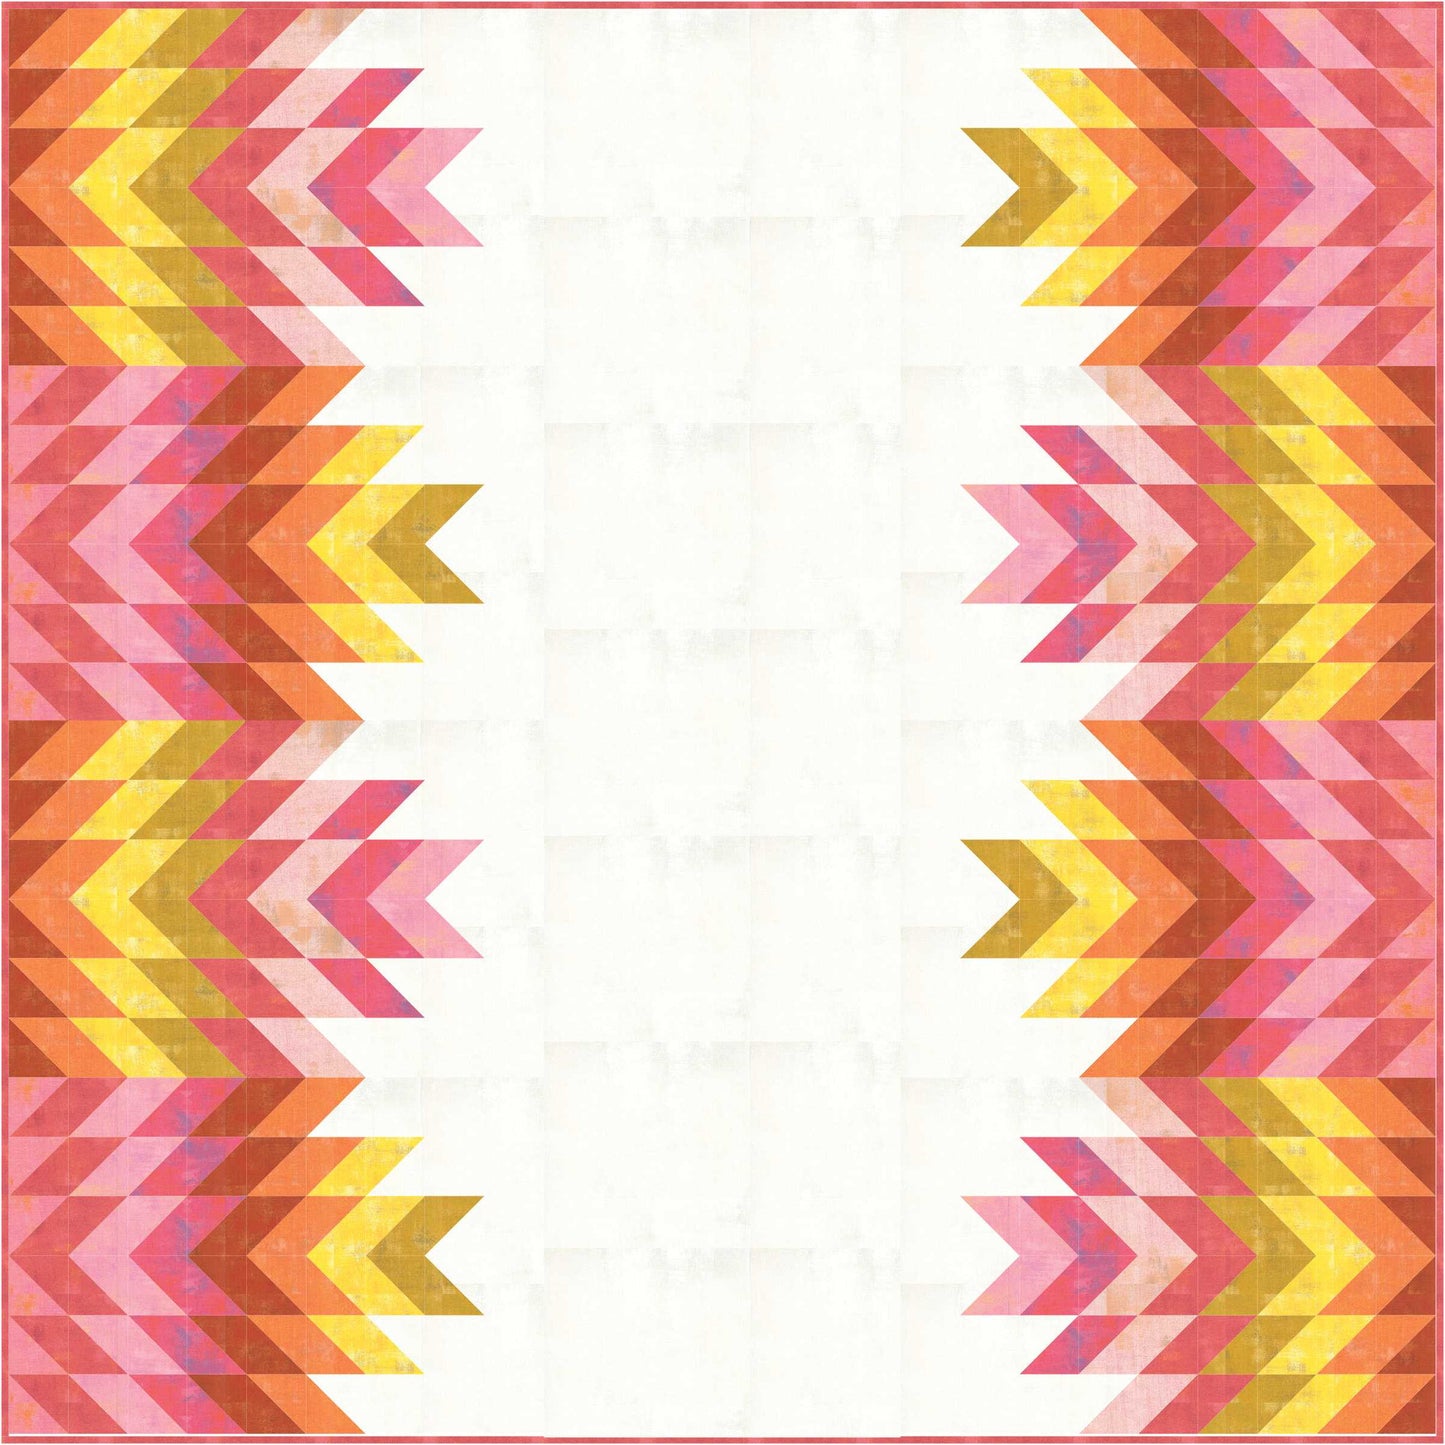 Quill Quilt Pattern